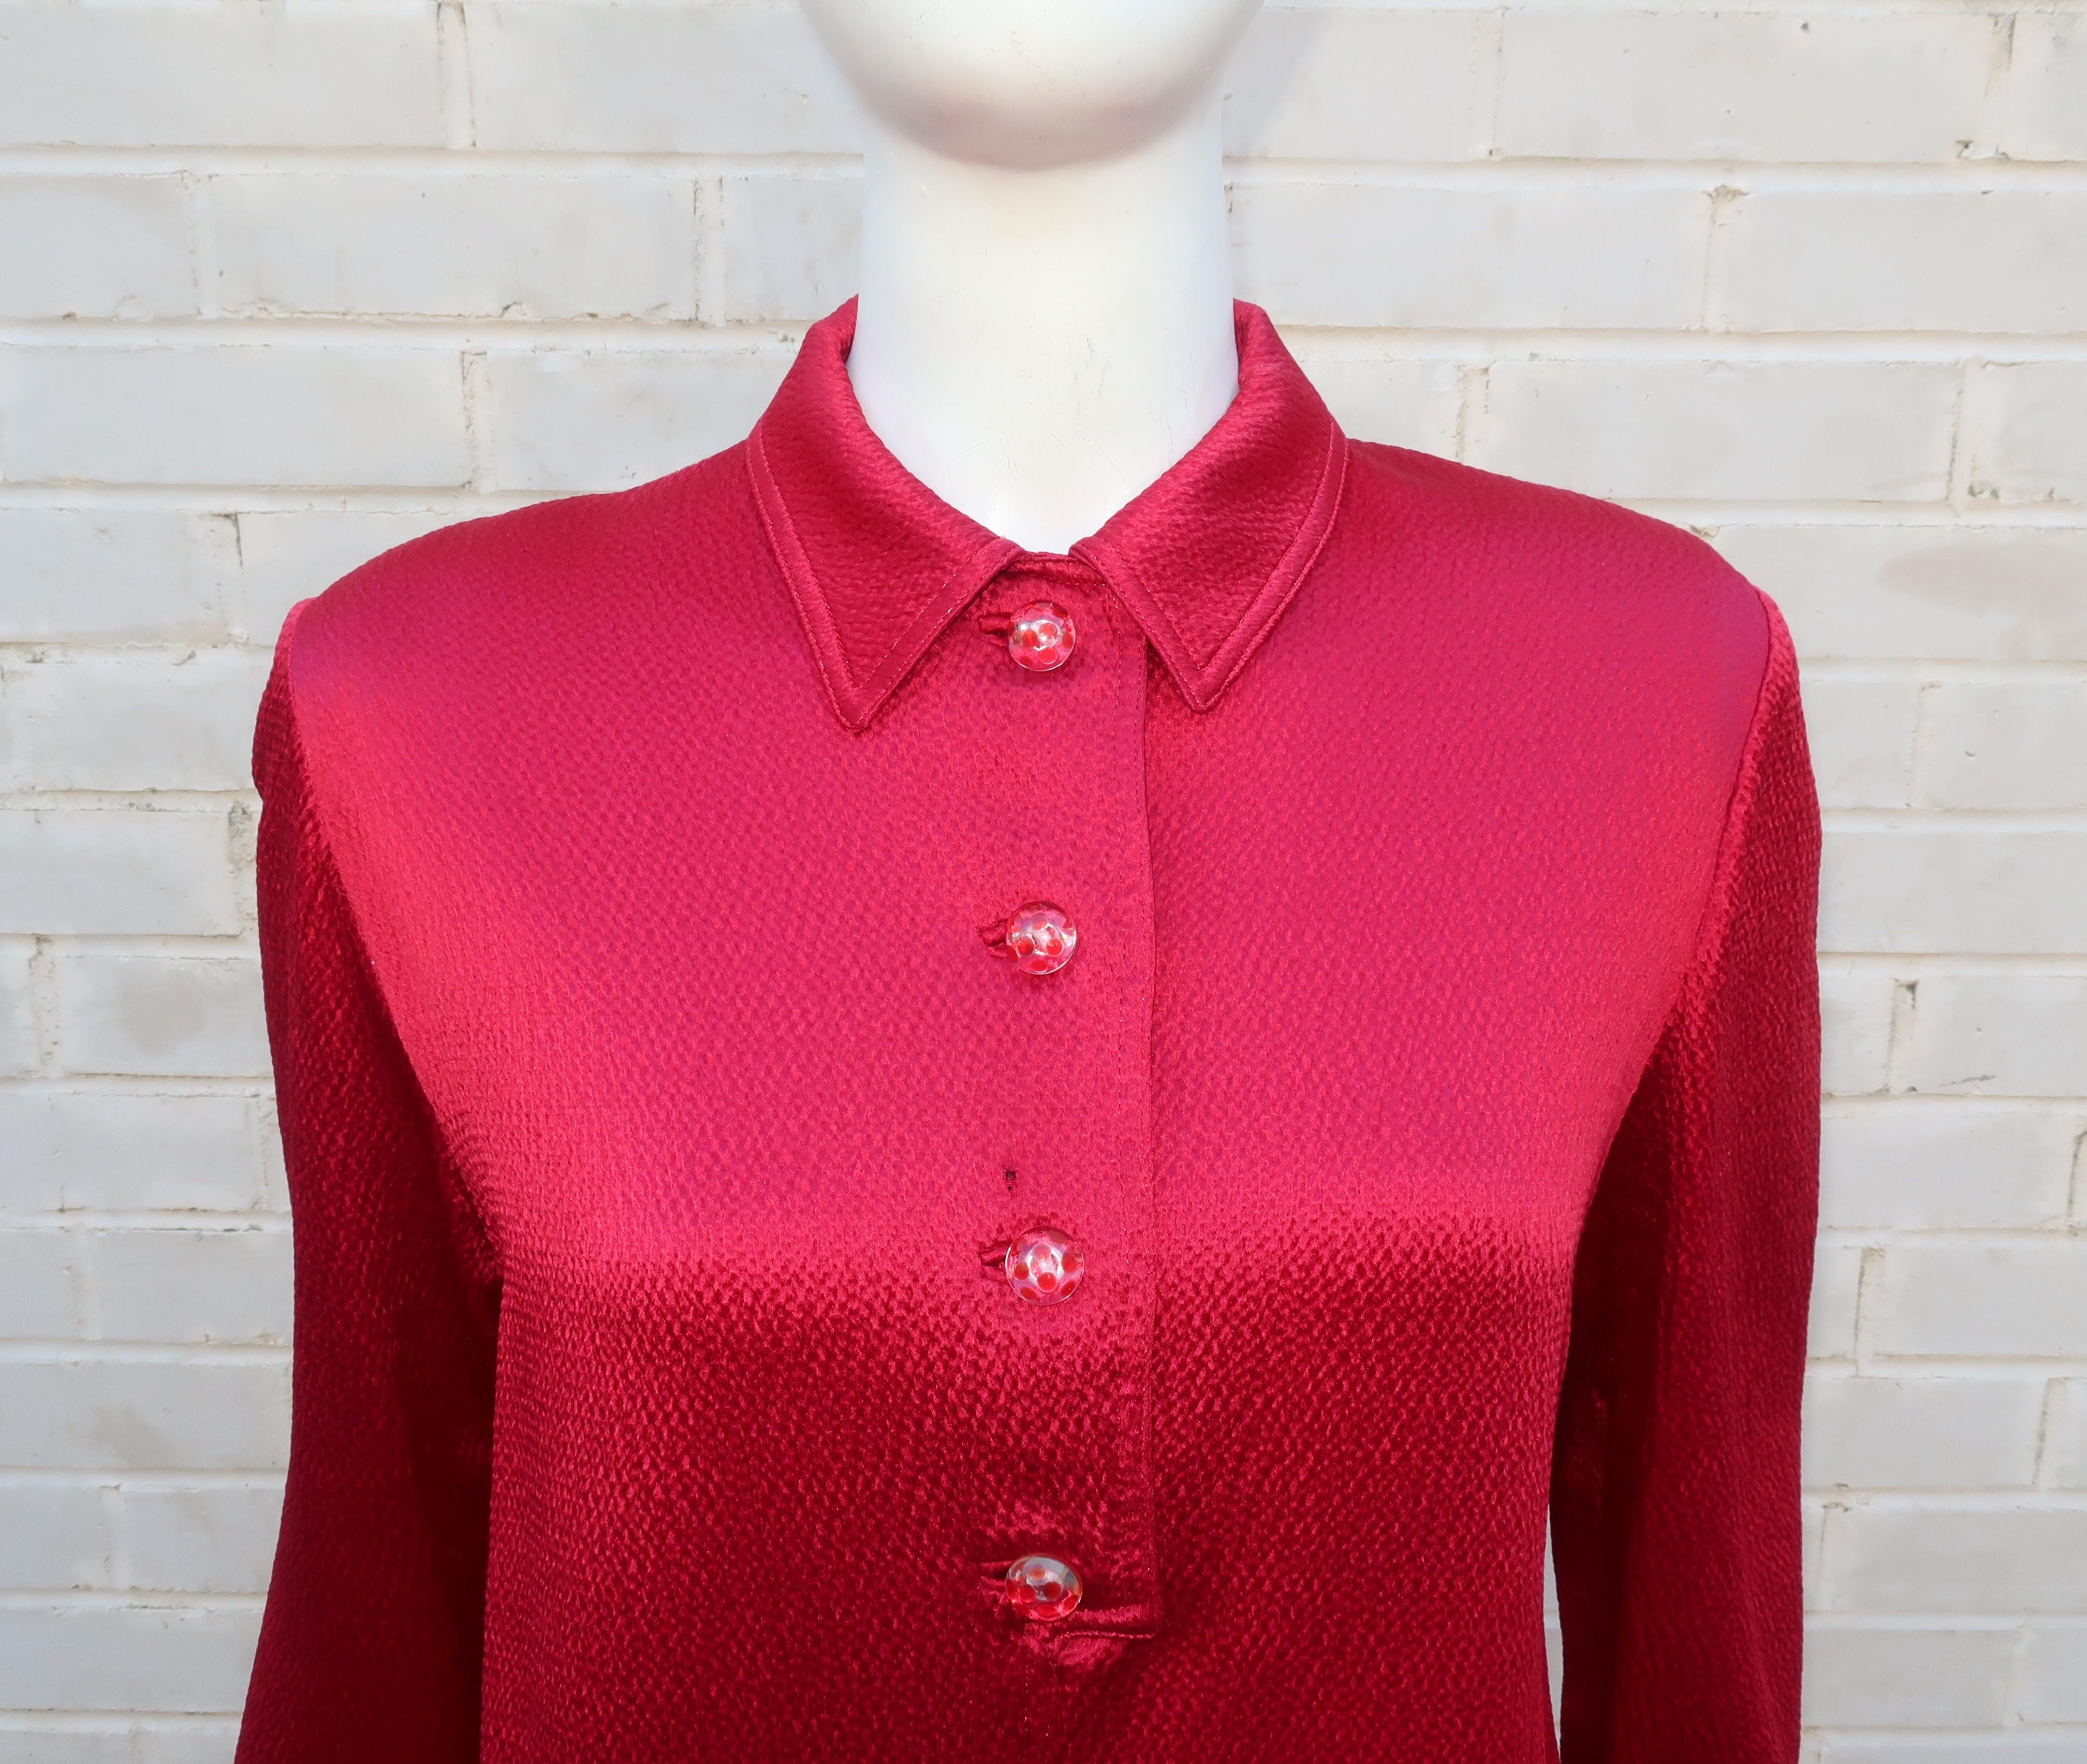 Geoffrey Beene Ruby Red Satin Shirt Dress With Lucite Buttons, 1980's 2